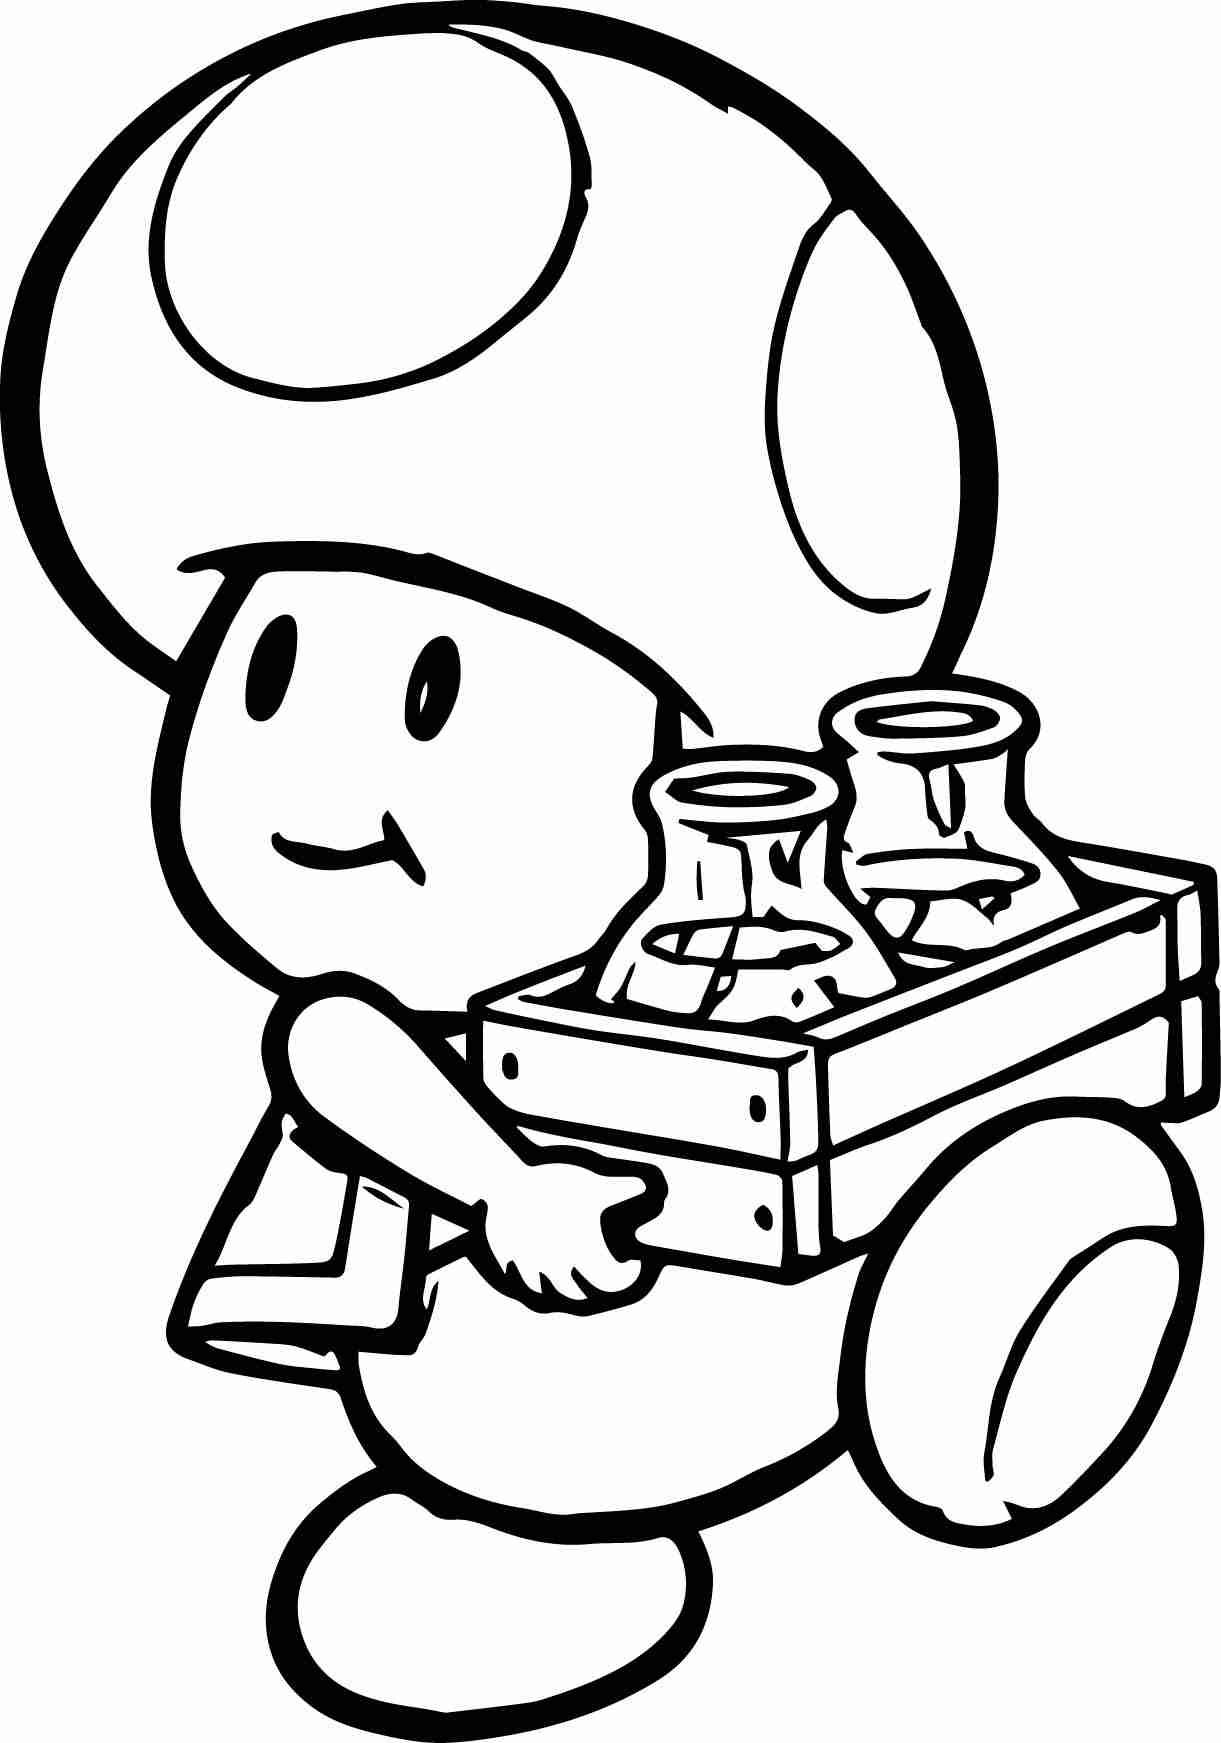 Nintendo Characters Coloring Pages at Free printable